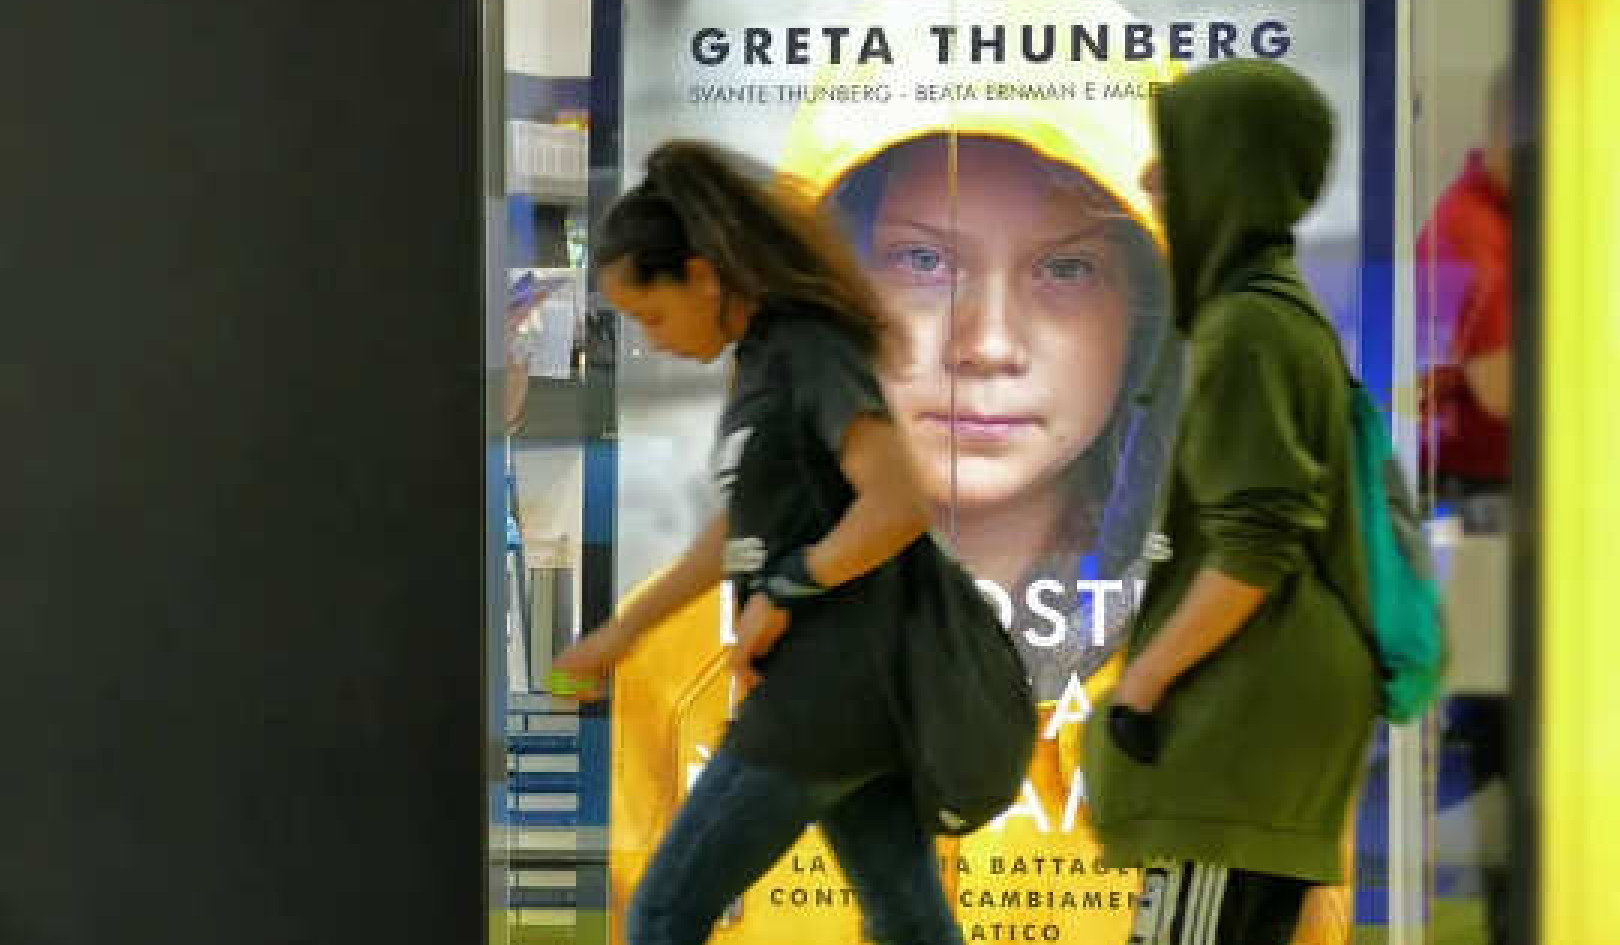 The Greta Thunberg Effect: People Familiar with Young Climate Activist May Be More Likely To Act